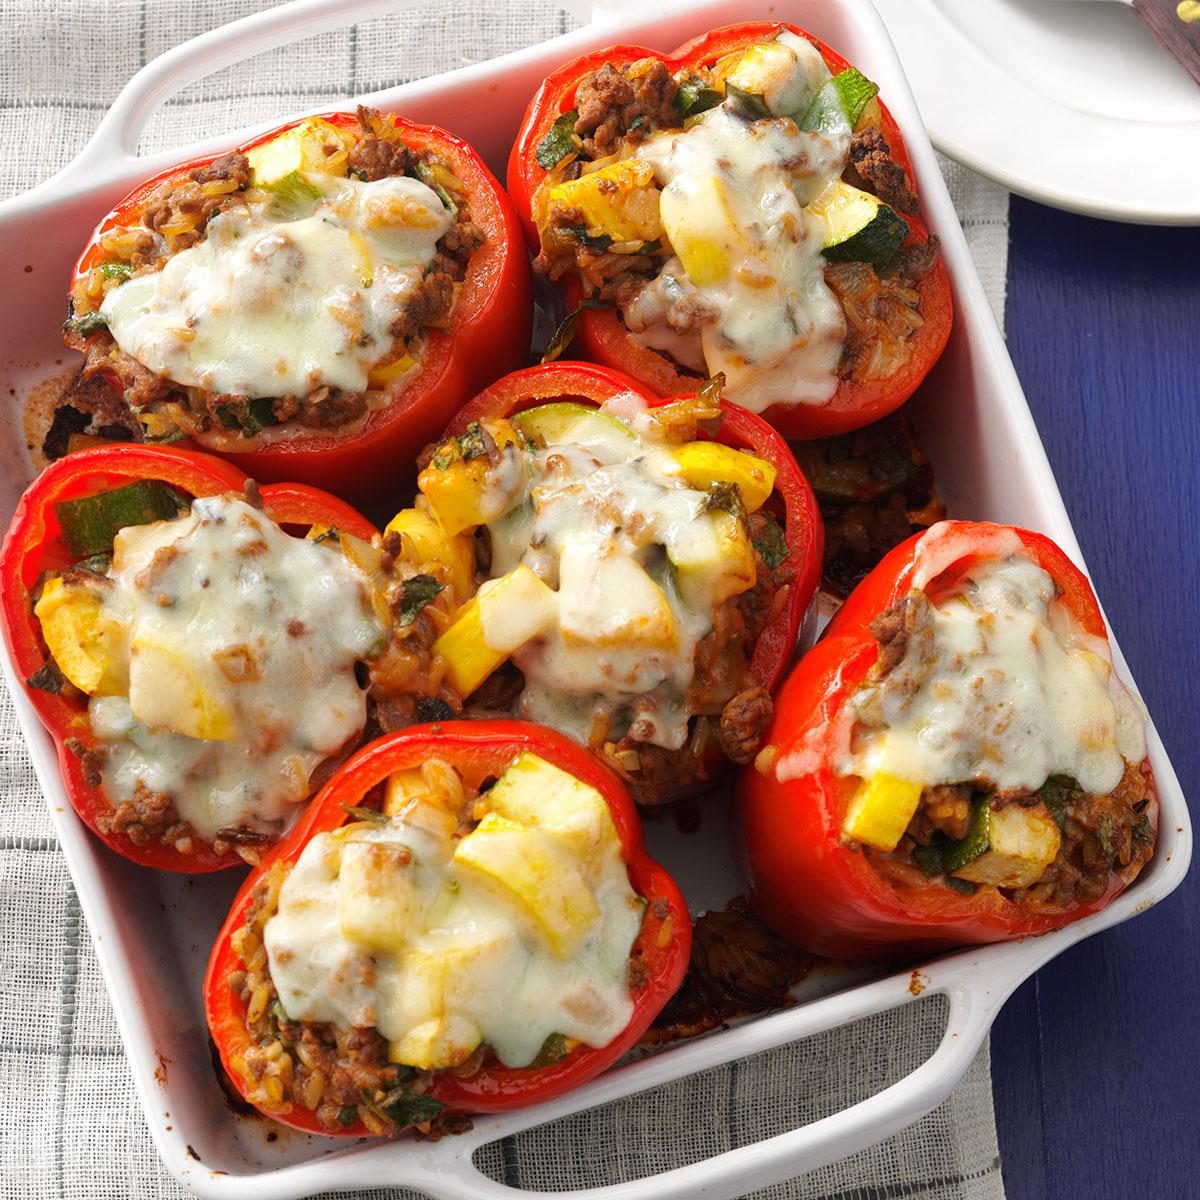 Day 20: Vegetable & Beef Stuffed Red Peppers